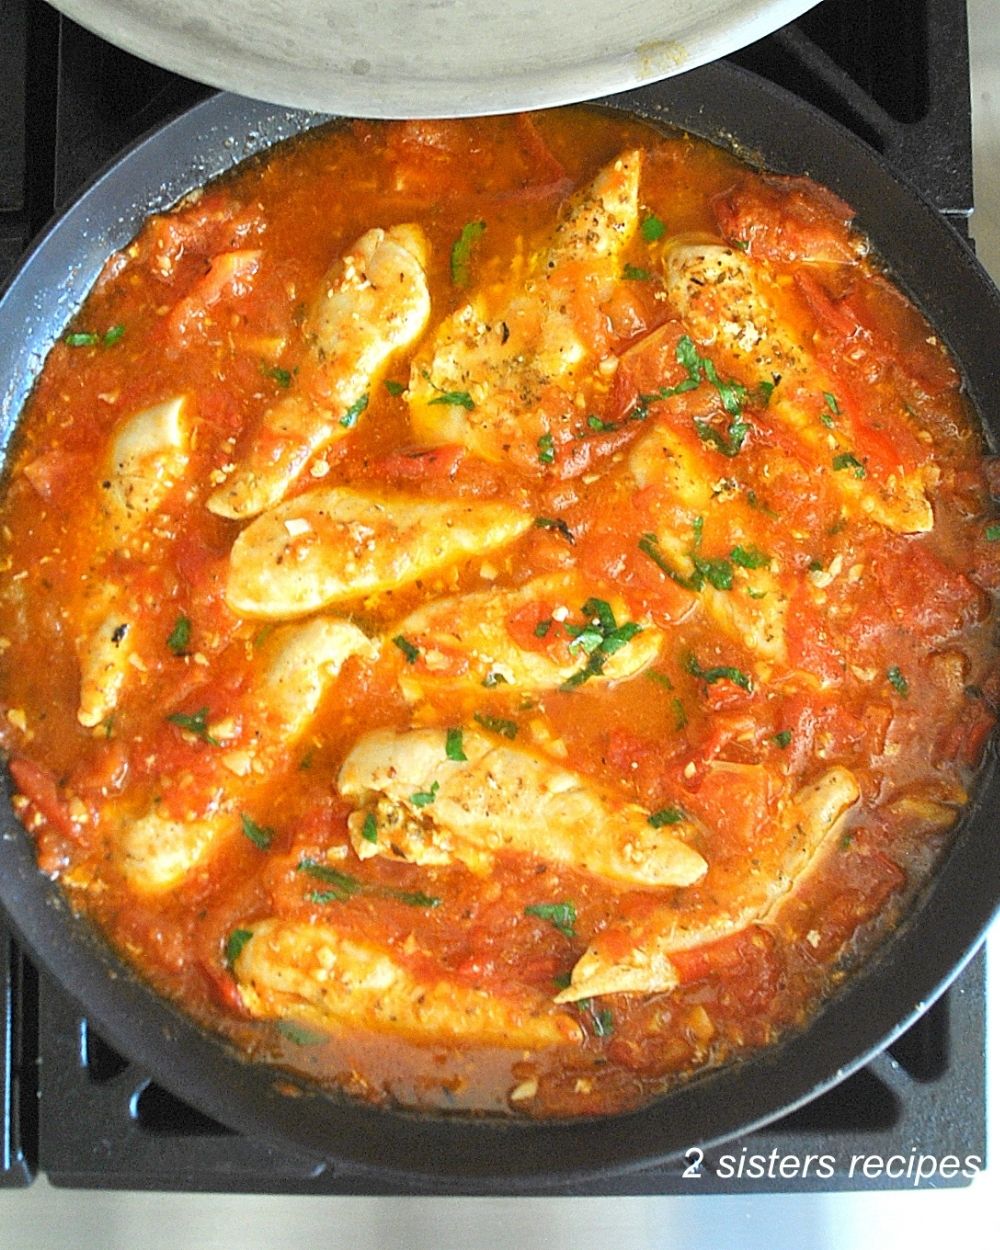 A large skillet with chicken tenders in a tomato base sauce.